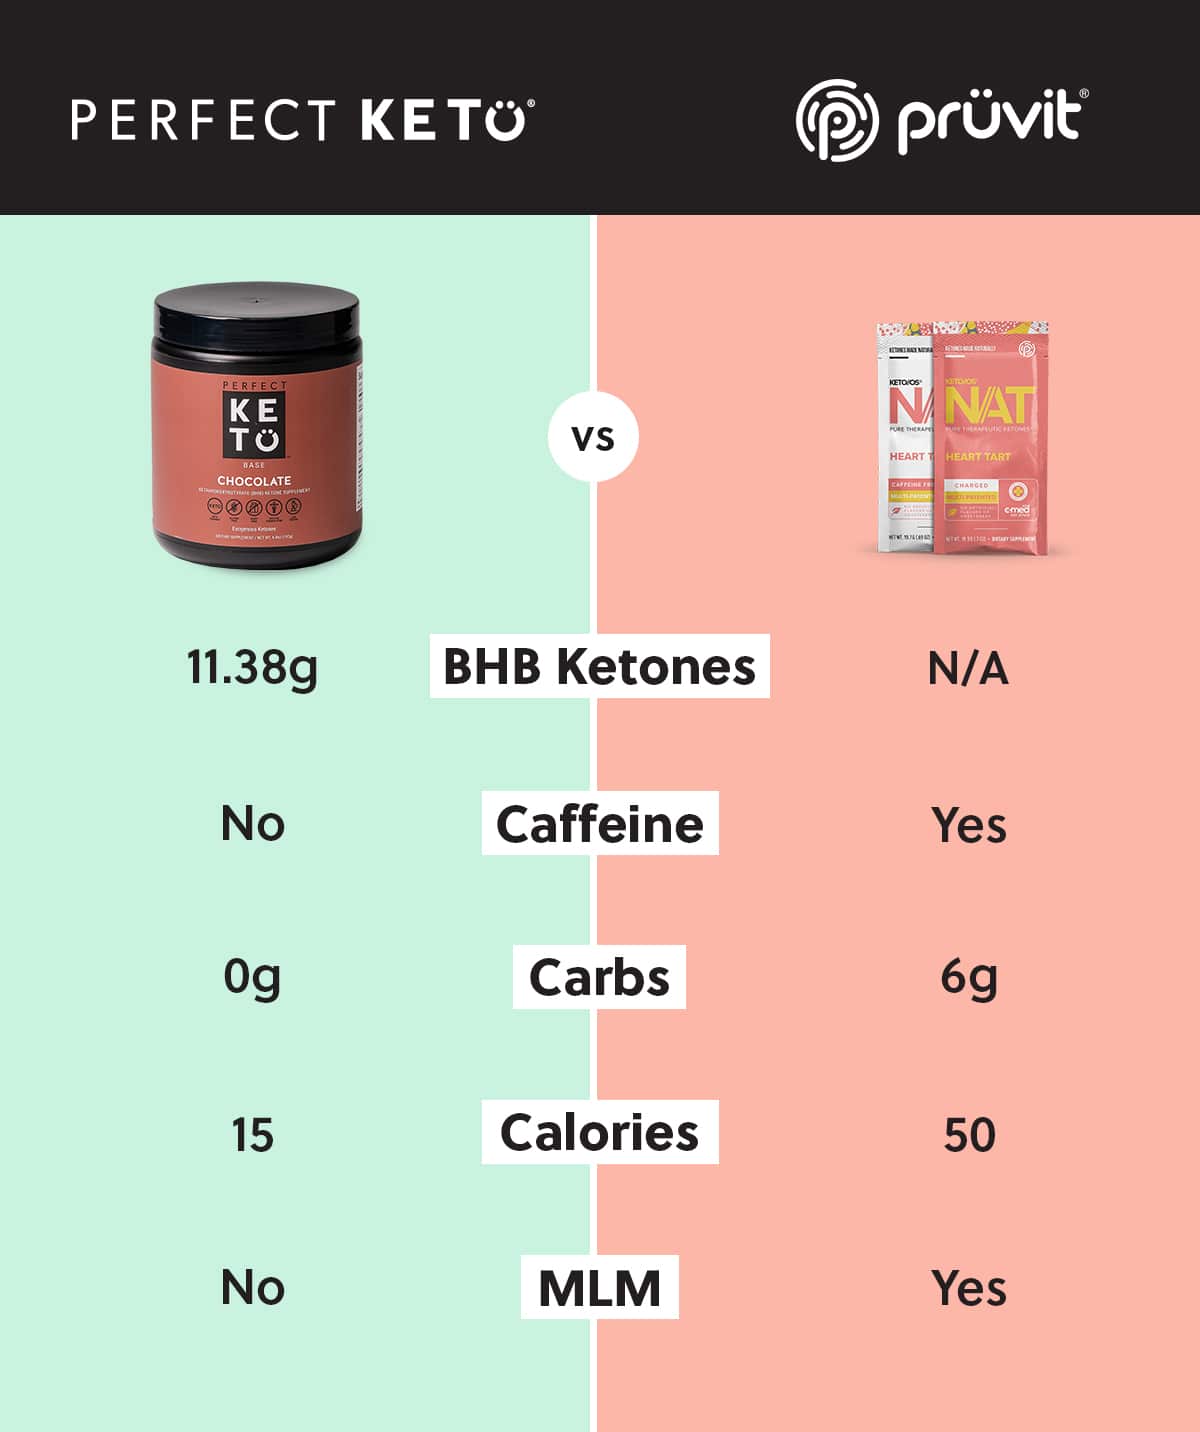 Perfect Keto vs. Pruvit Keto: How Do They Measure Up?